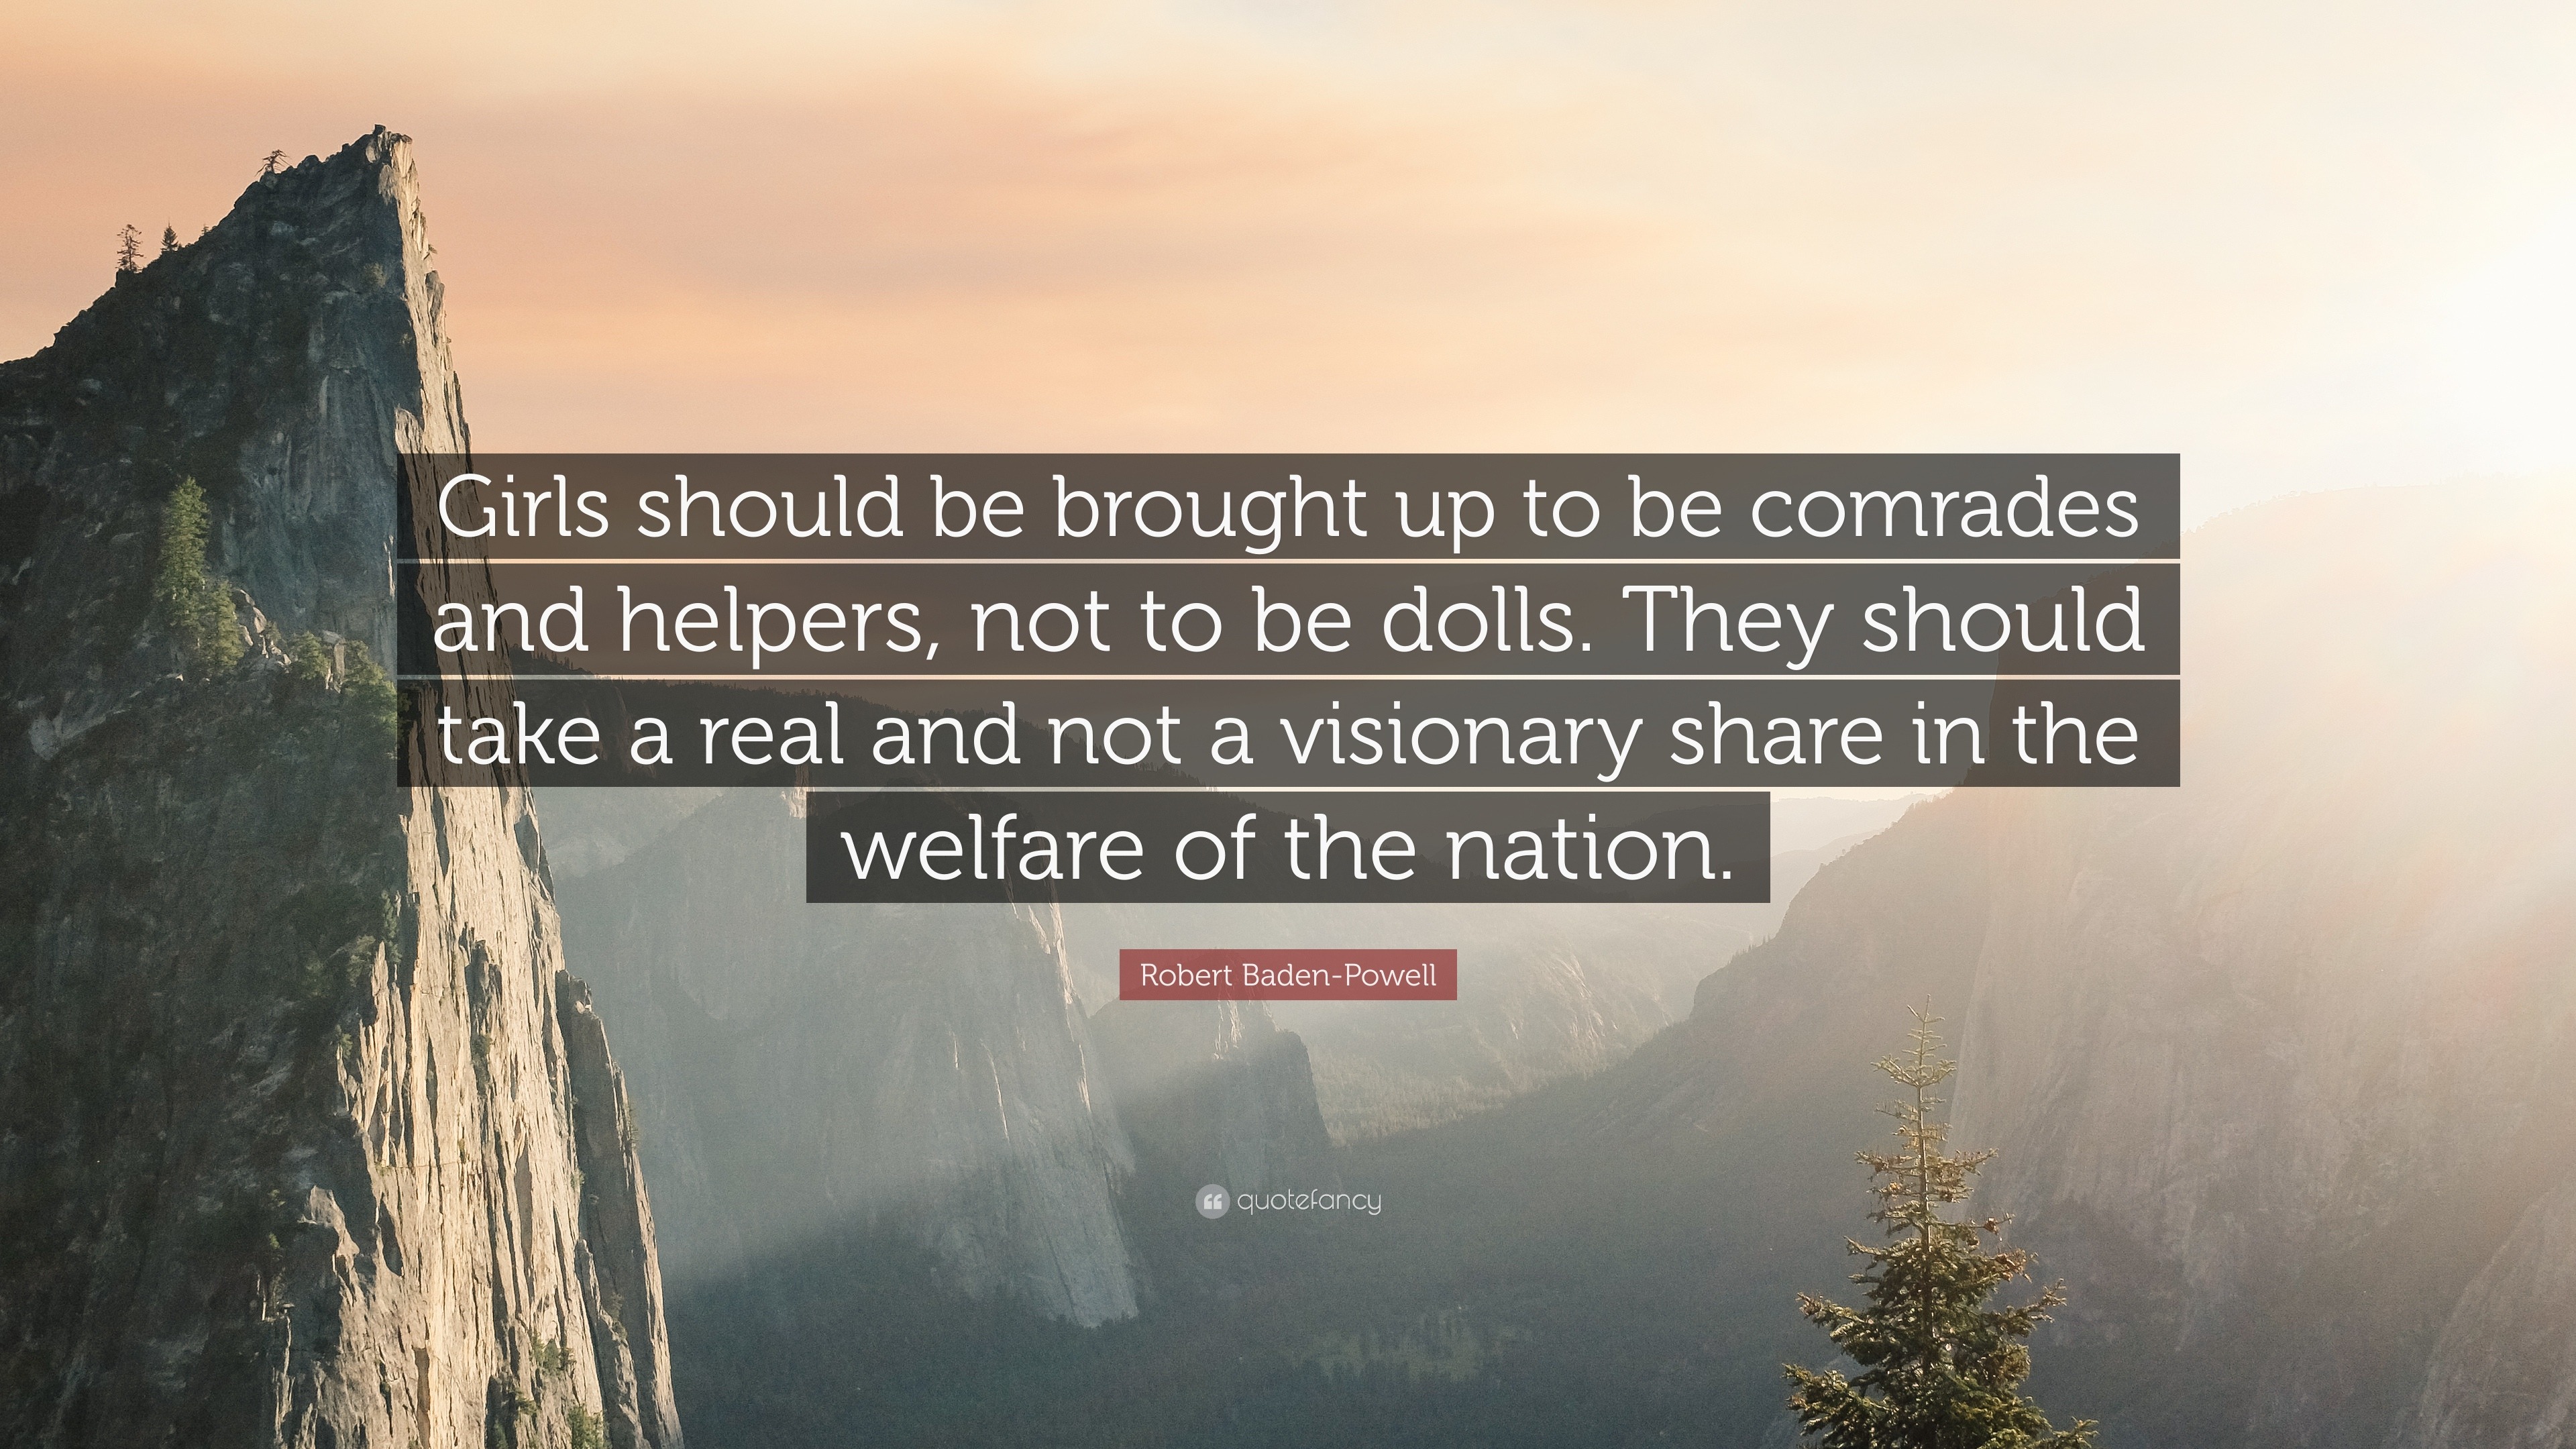 Robert Baden-Powell Quote: “Girls should be brought up to be comrades